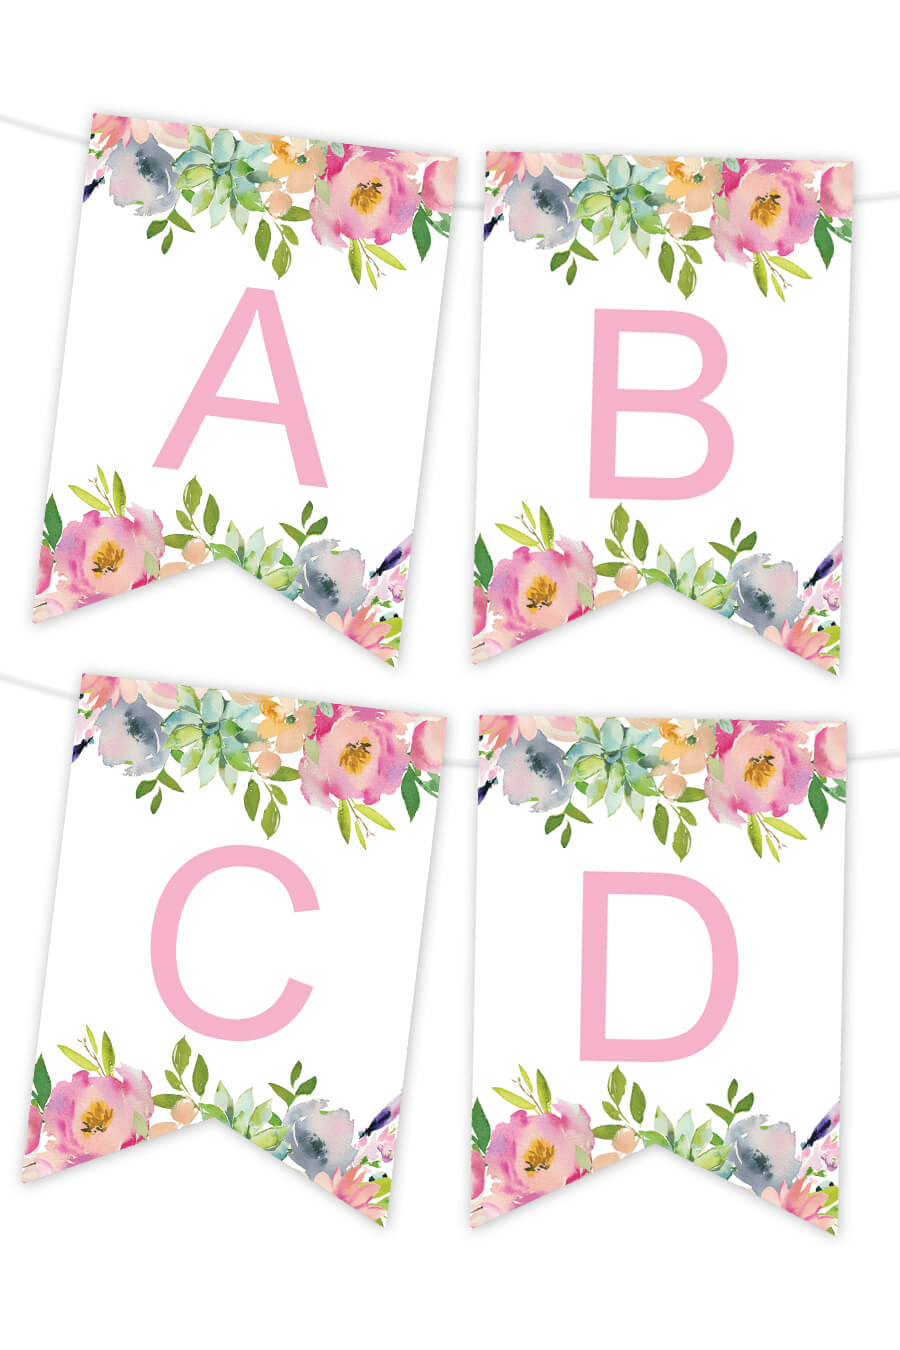 Impertinent Free Printable Banner Templates | Kenzi's Blog With Printable Banners Templates Free